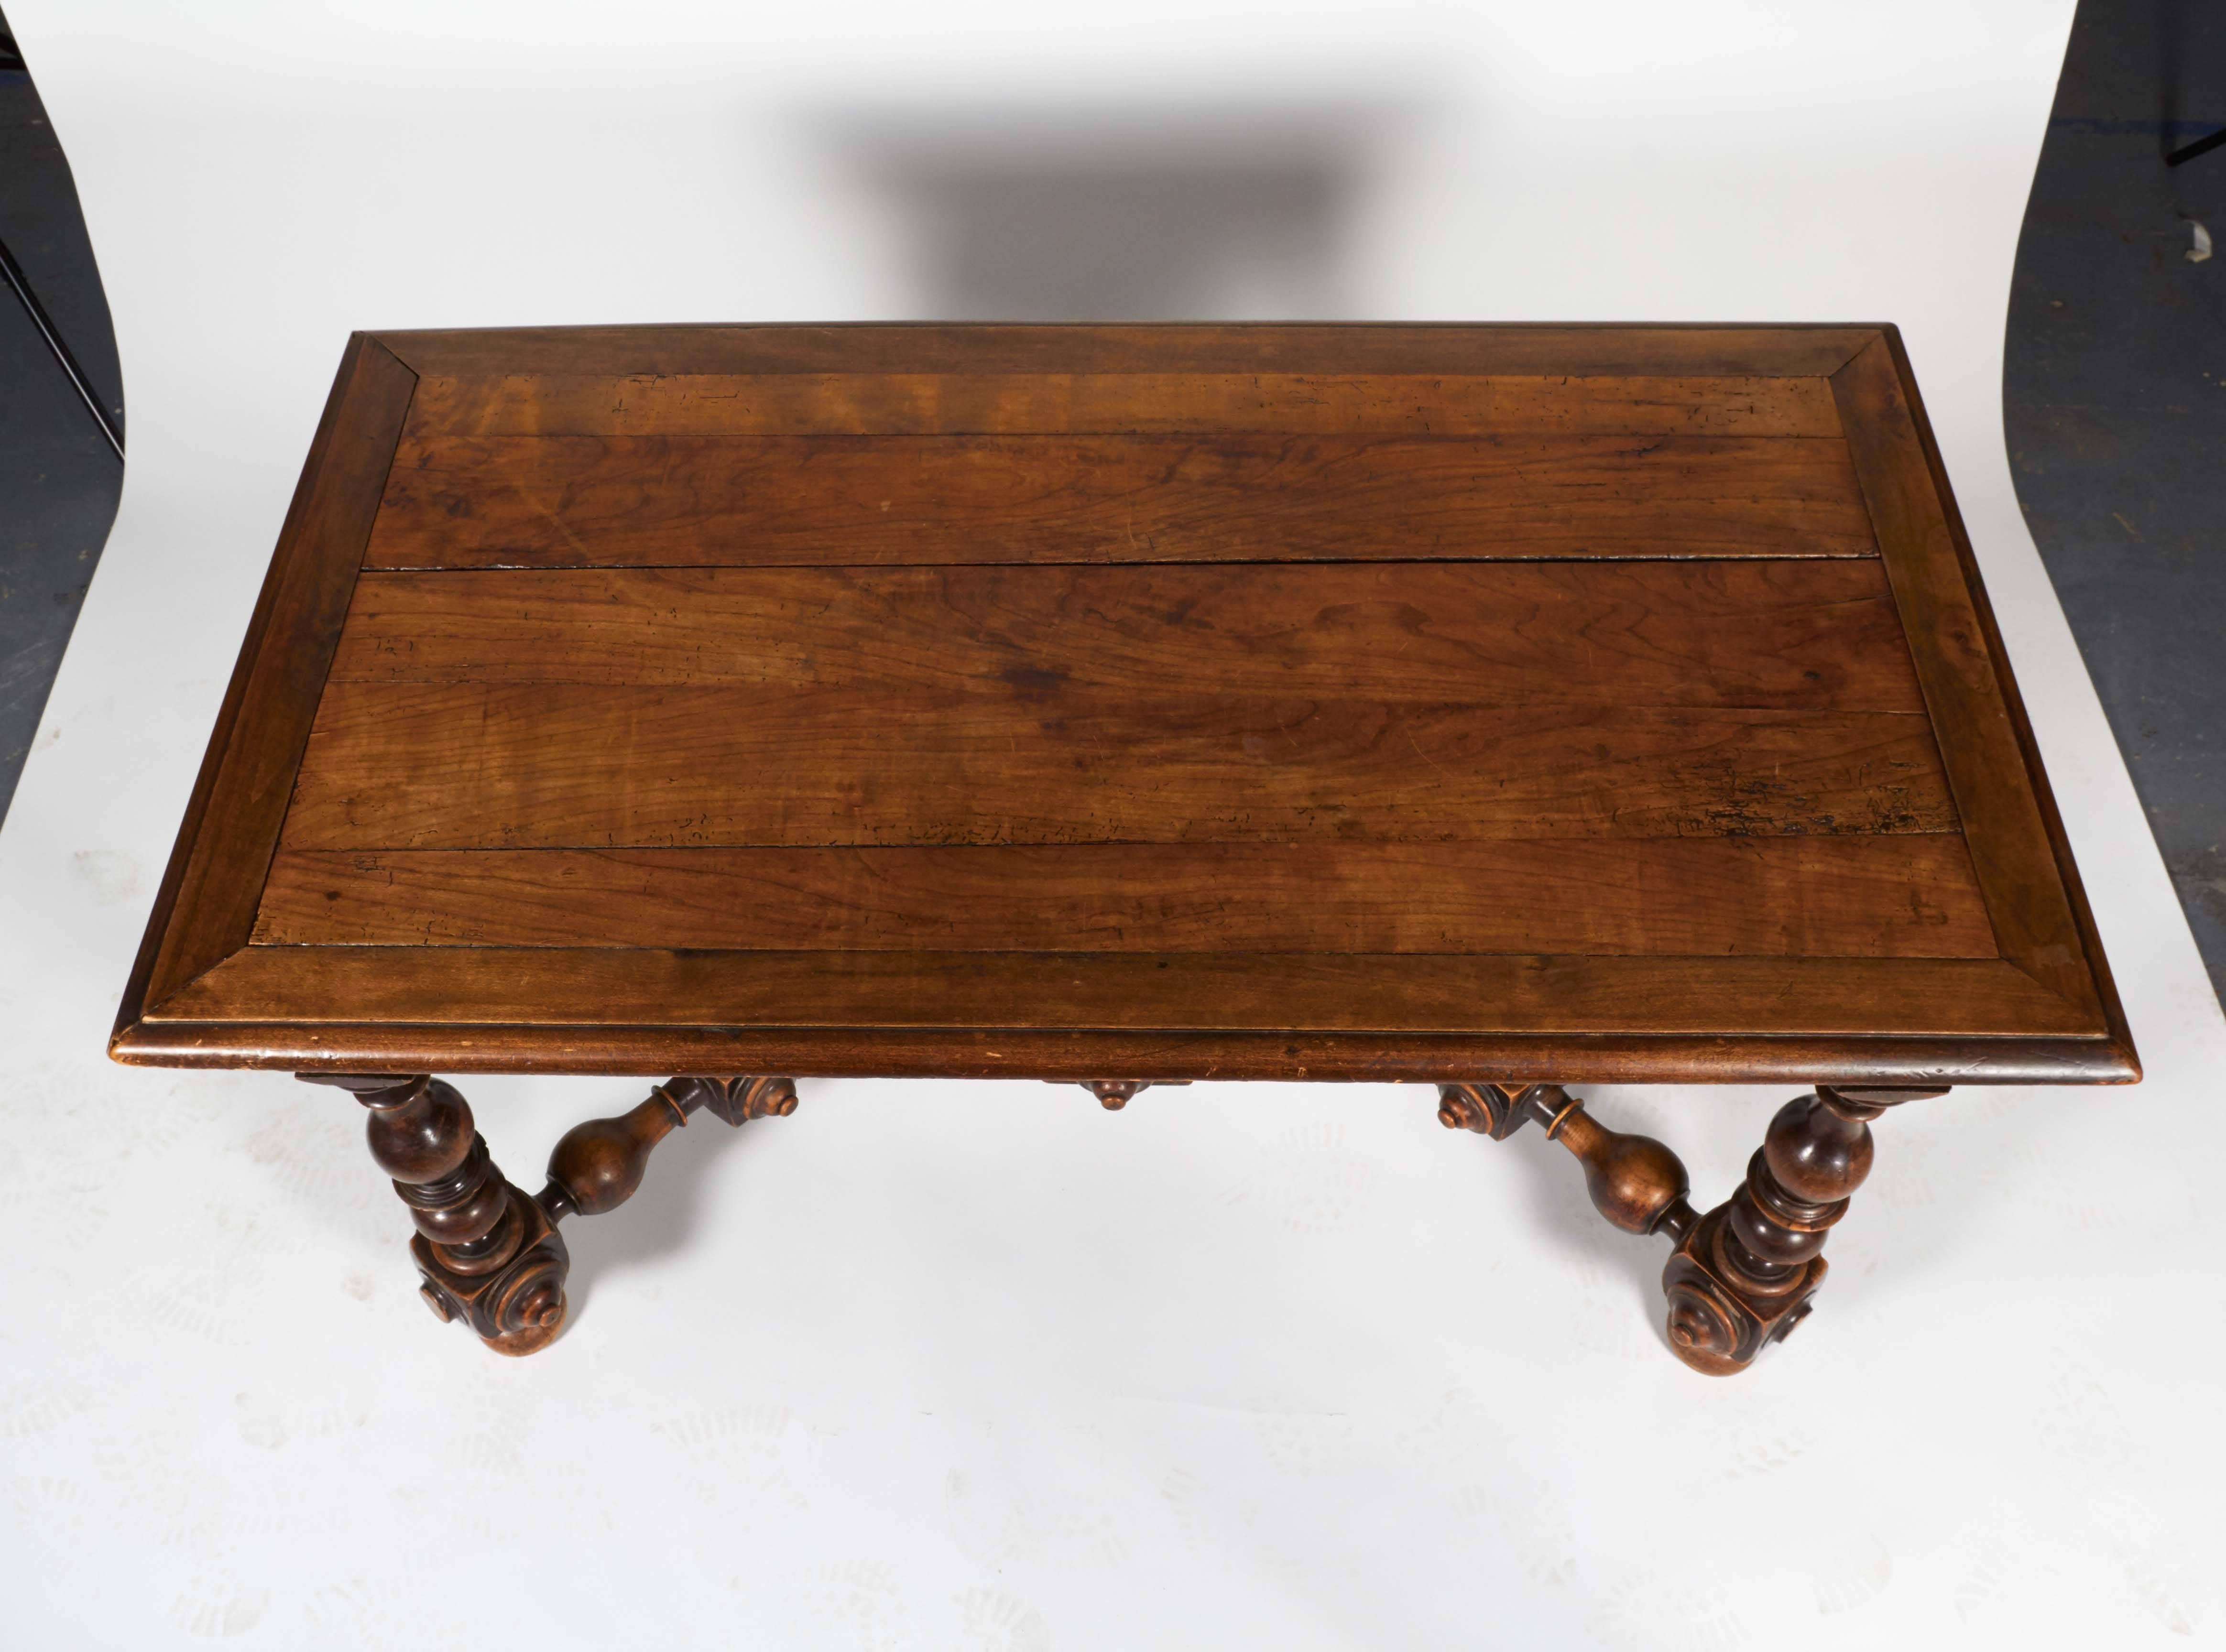 Wood Table with Ornate Legs 2